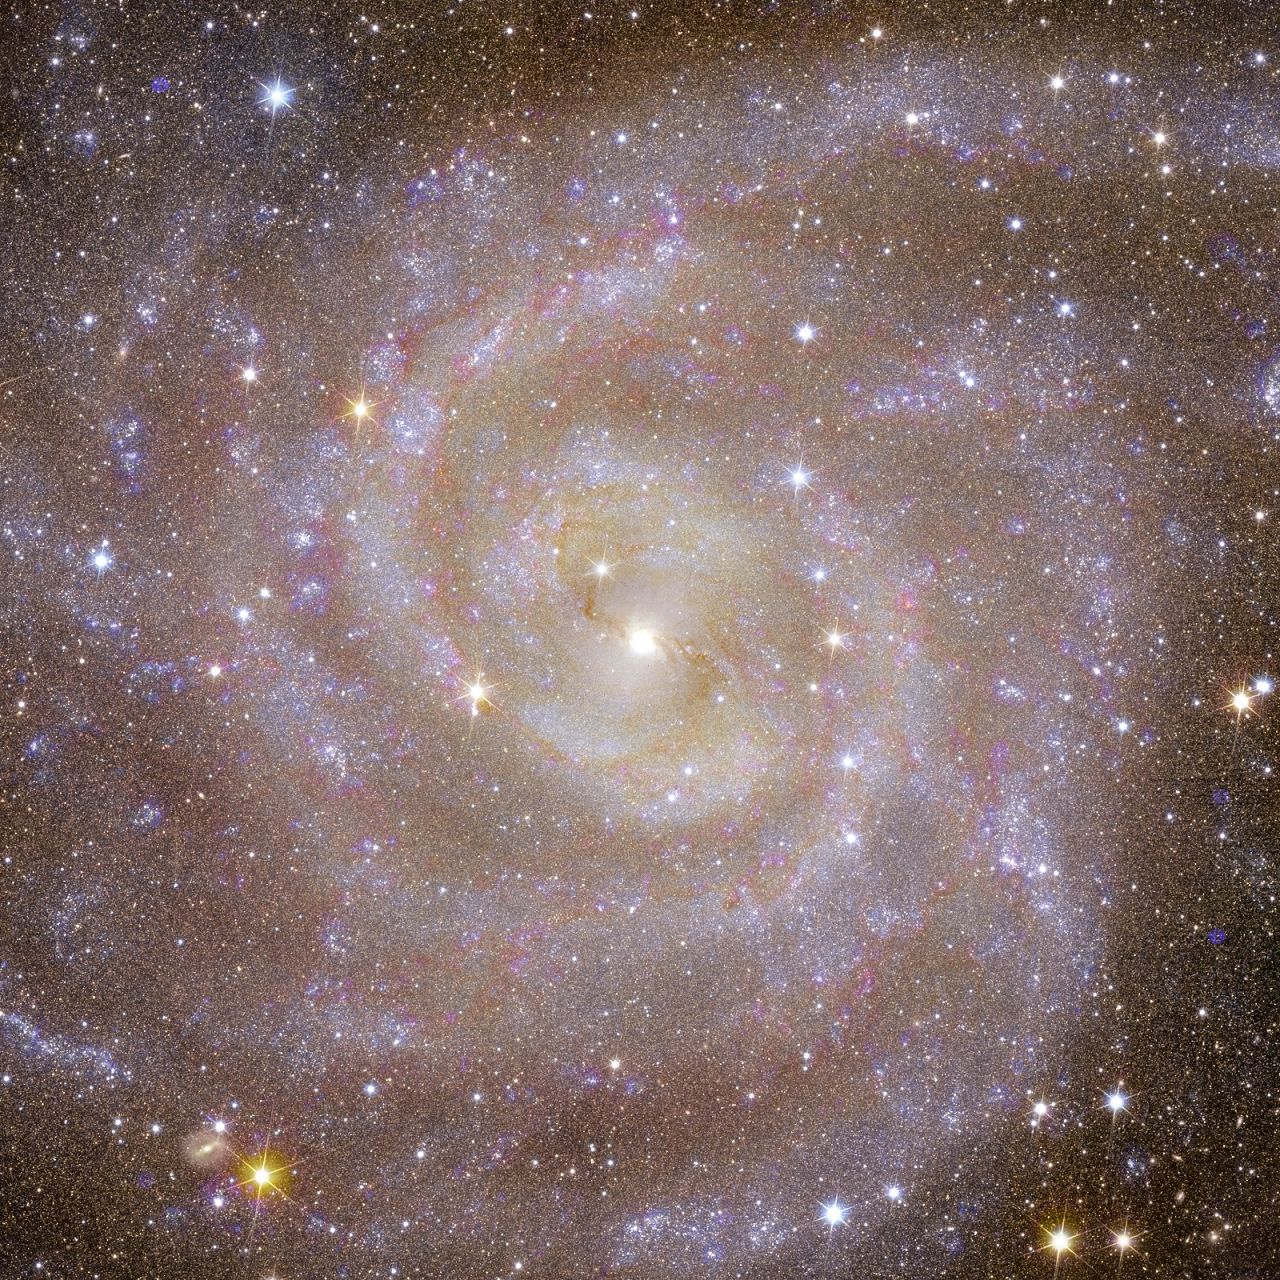 Euclid's view of the spiral galaxy IC 342, known as the "Hidden Galaxy," which is similar to the Milky Way.